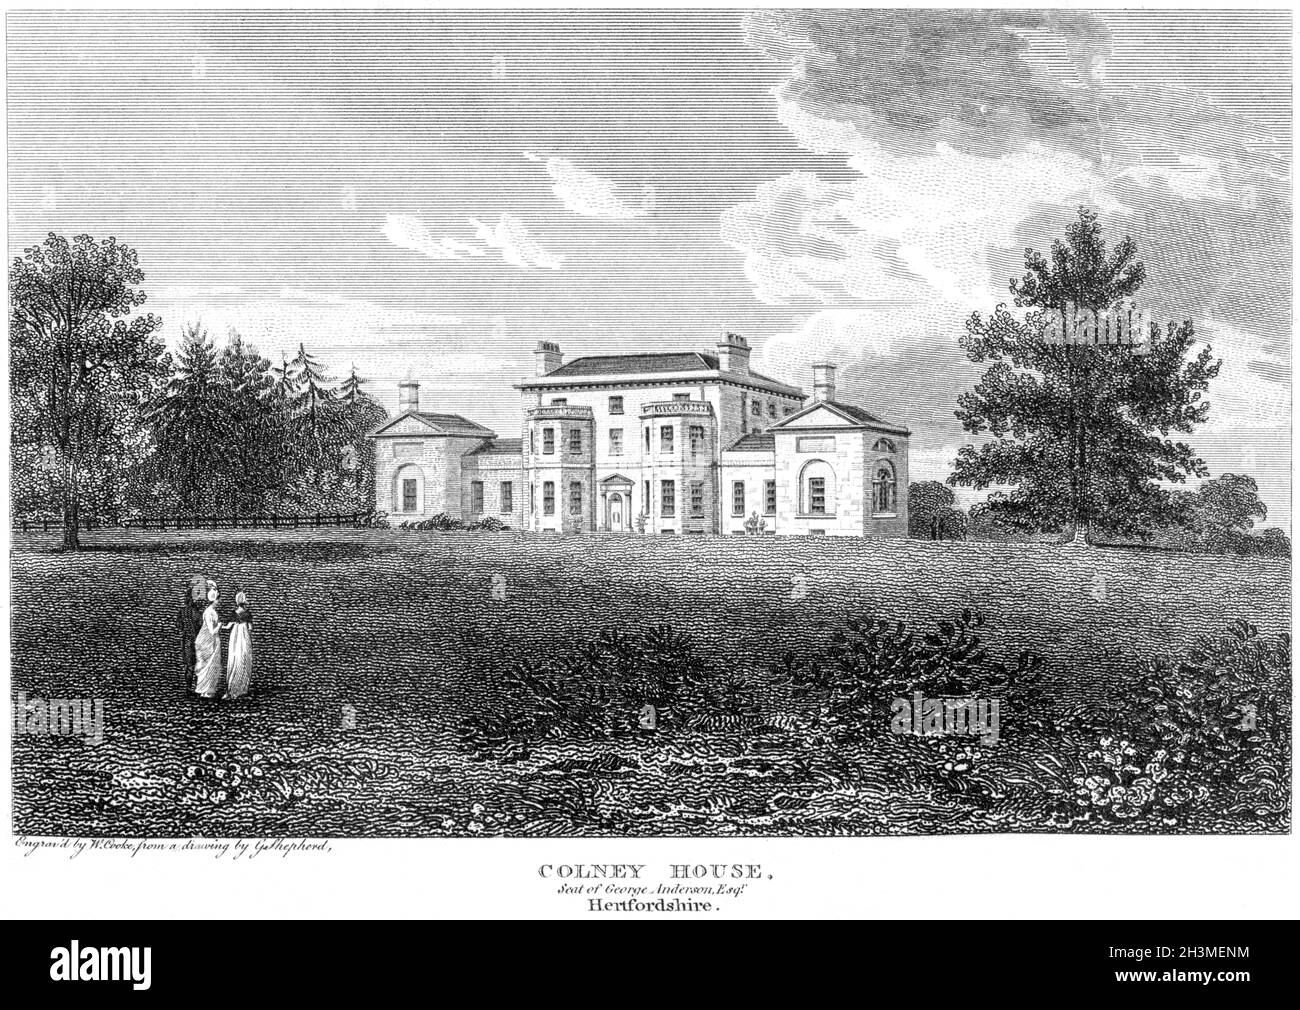 An engraving of Colney House, Seat of George Anderson Esq., Hertfordshire UK scanned at high resolution from a book printed in 1812. Stock Photo